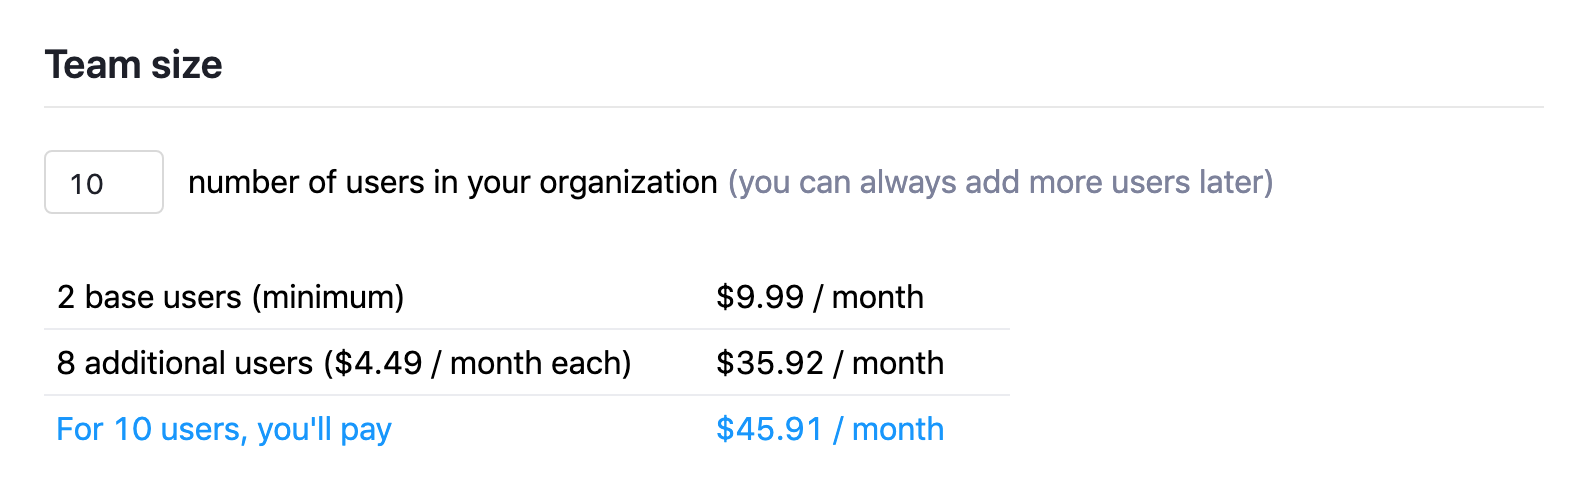 Enter your team size before adding payment information